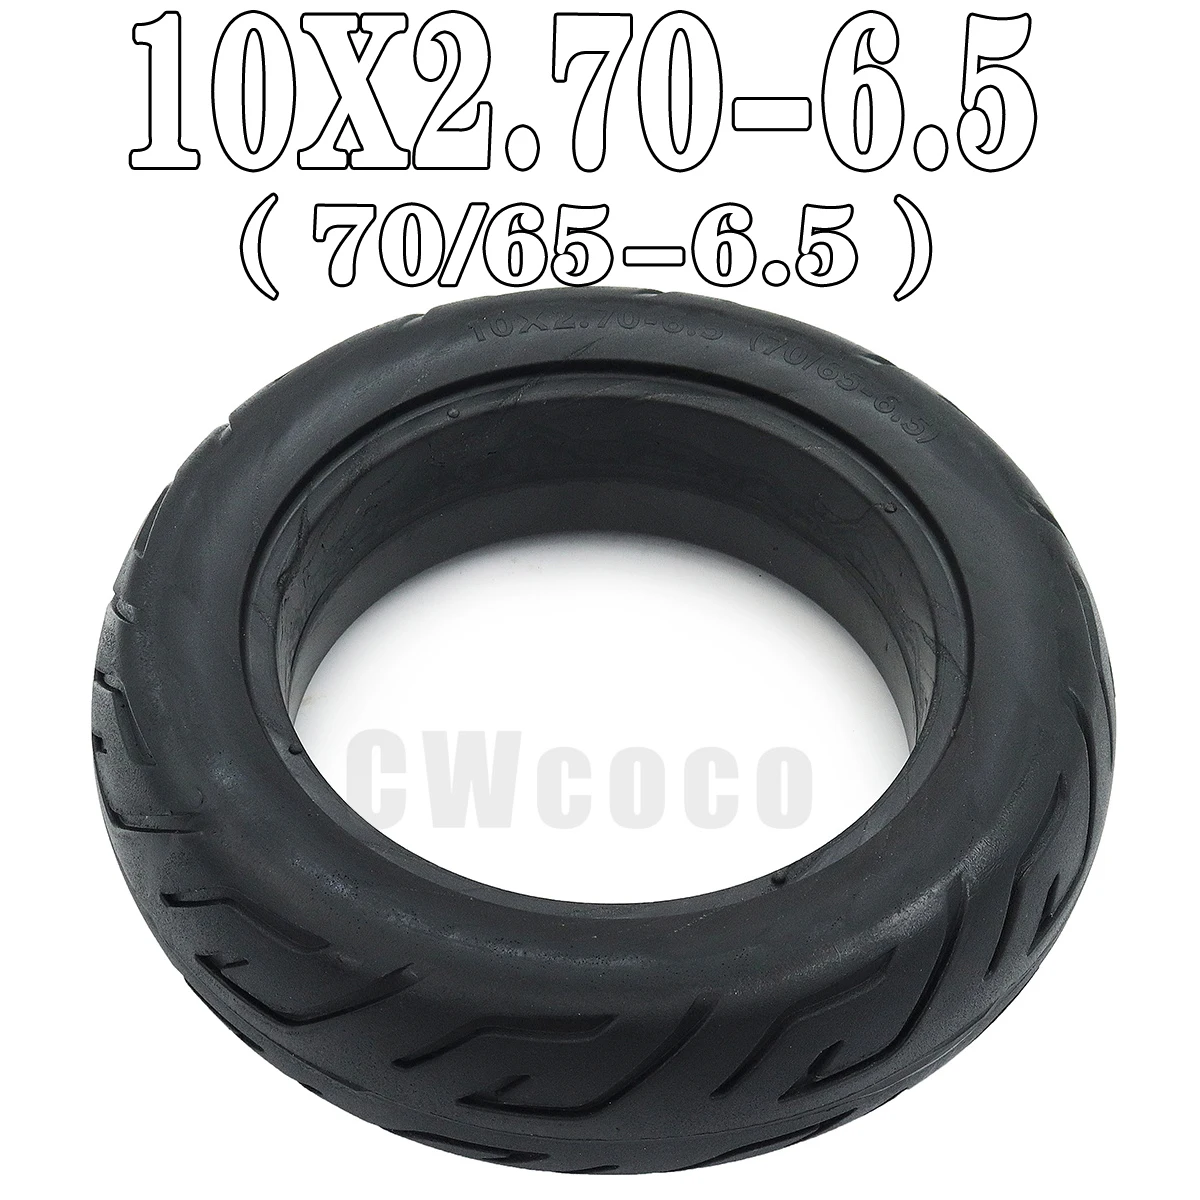 

10x2.70-6.5 Tire 10 Inch Solid Tire 70/65-6.5 Thickening and Wear Resistance Tyre Electric Scooter Balance Car Parts